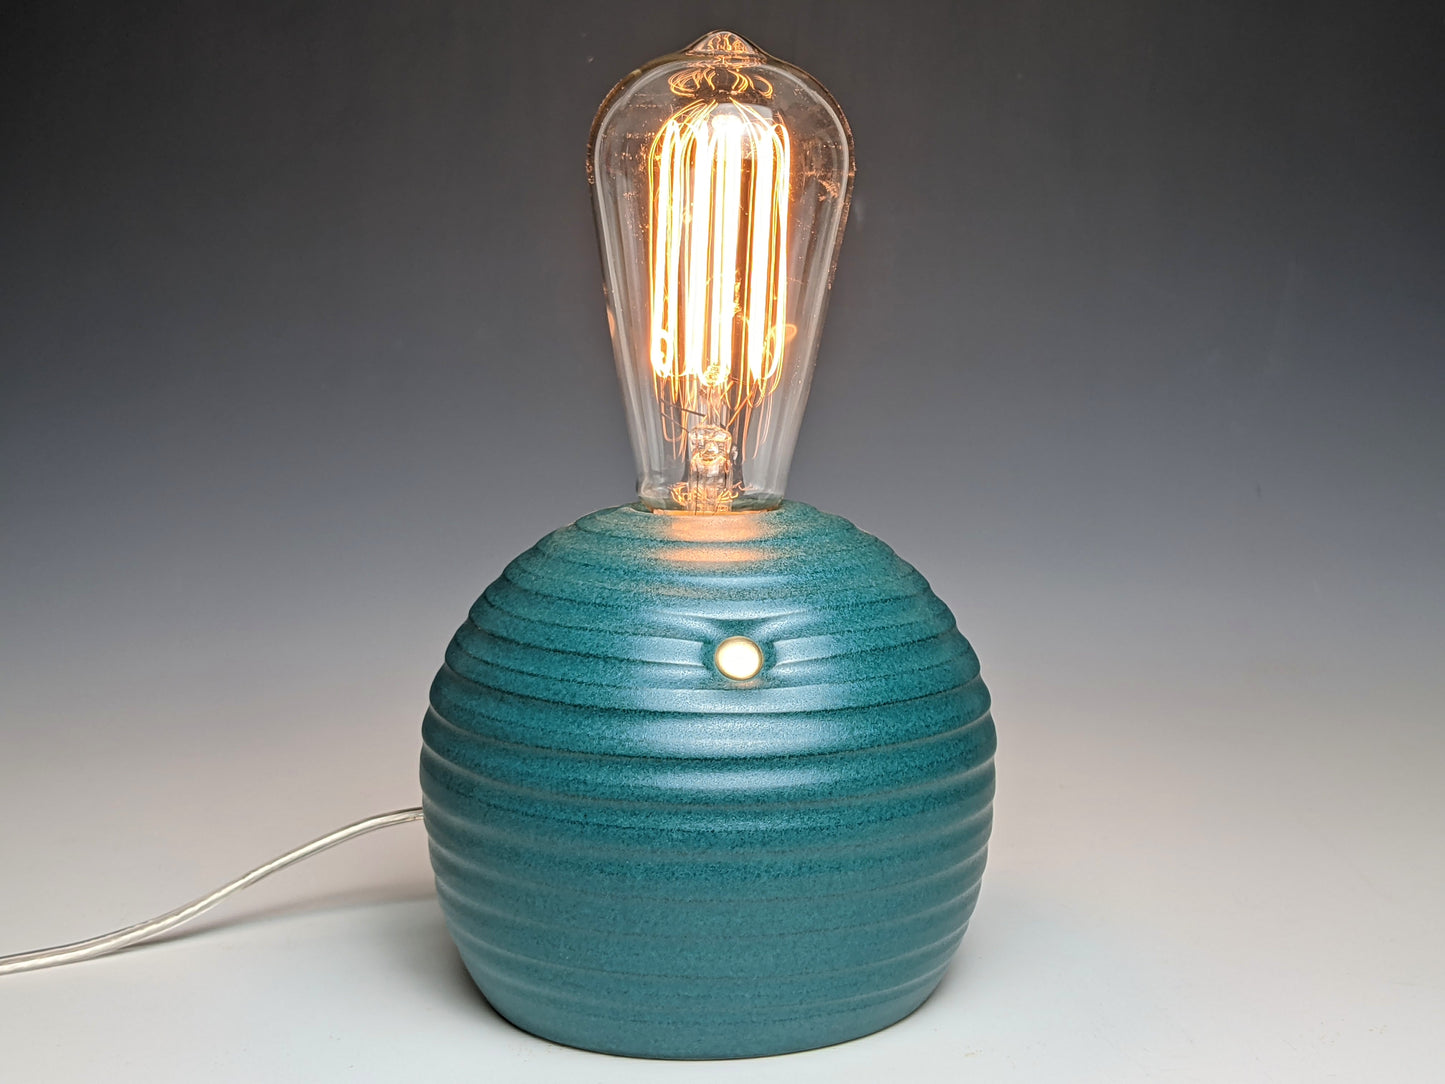 handcrafted smooth stoneware touch lamp in satin green glaze.